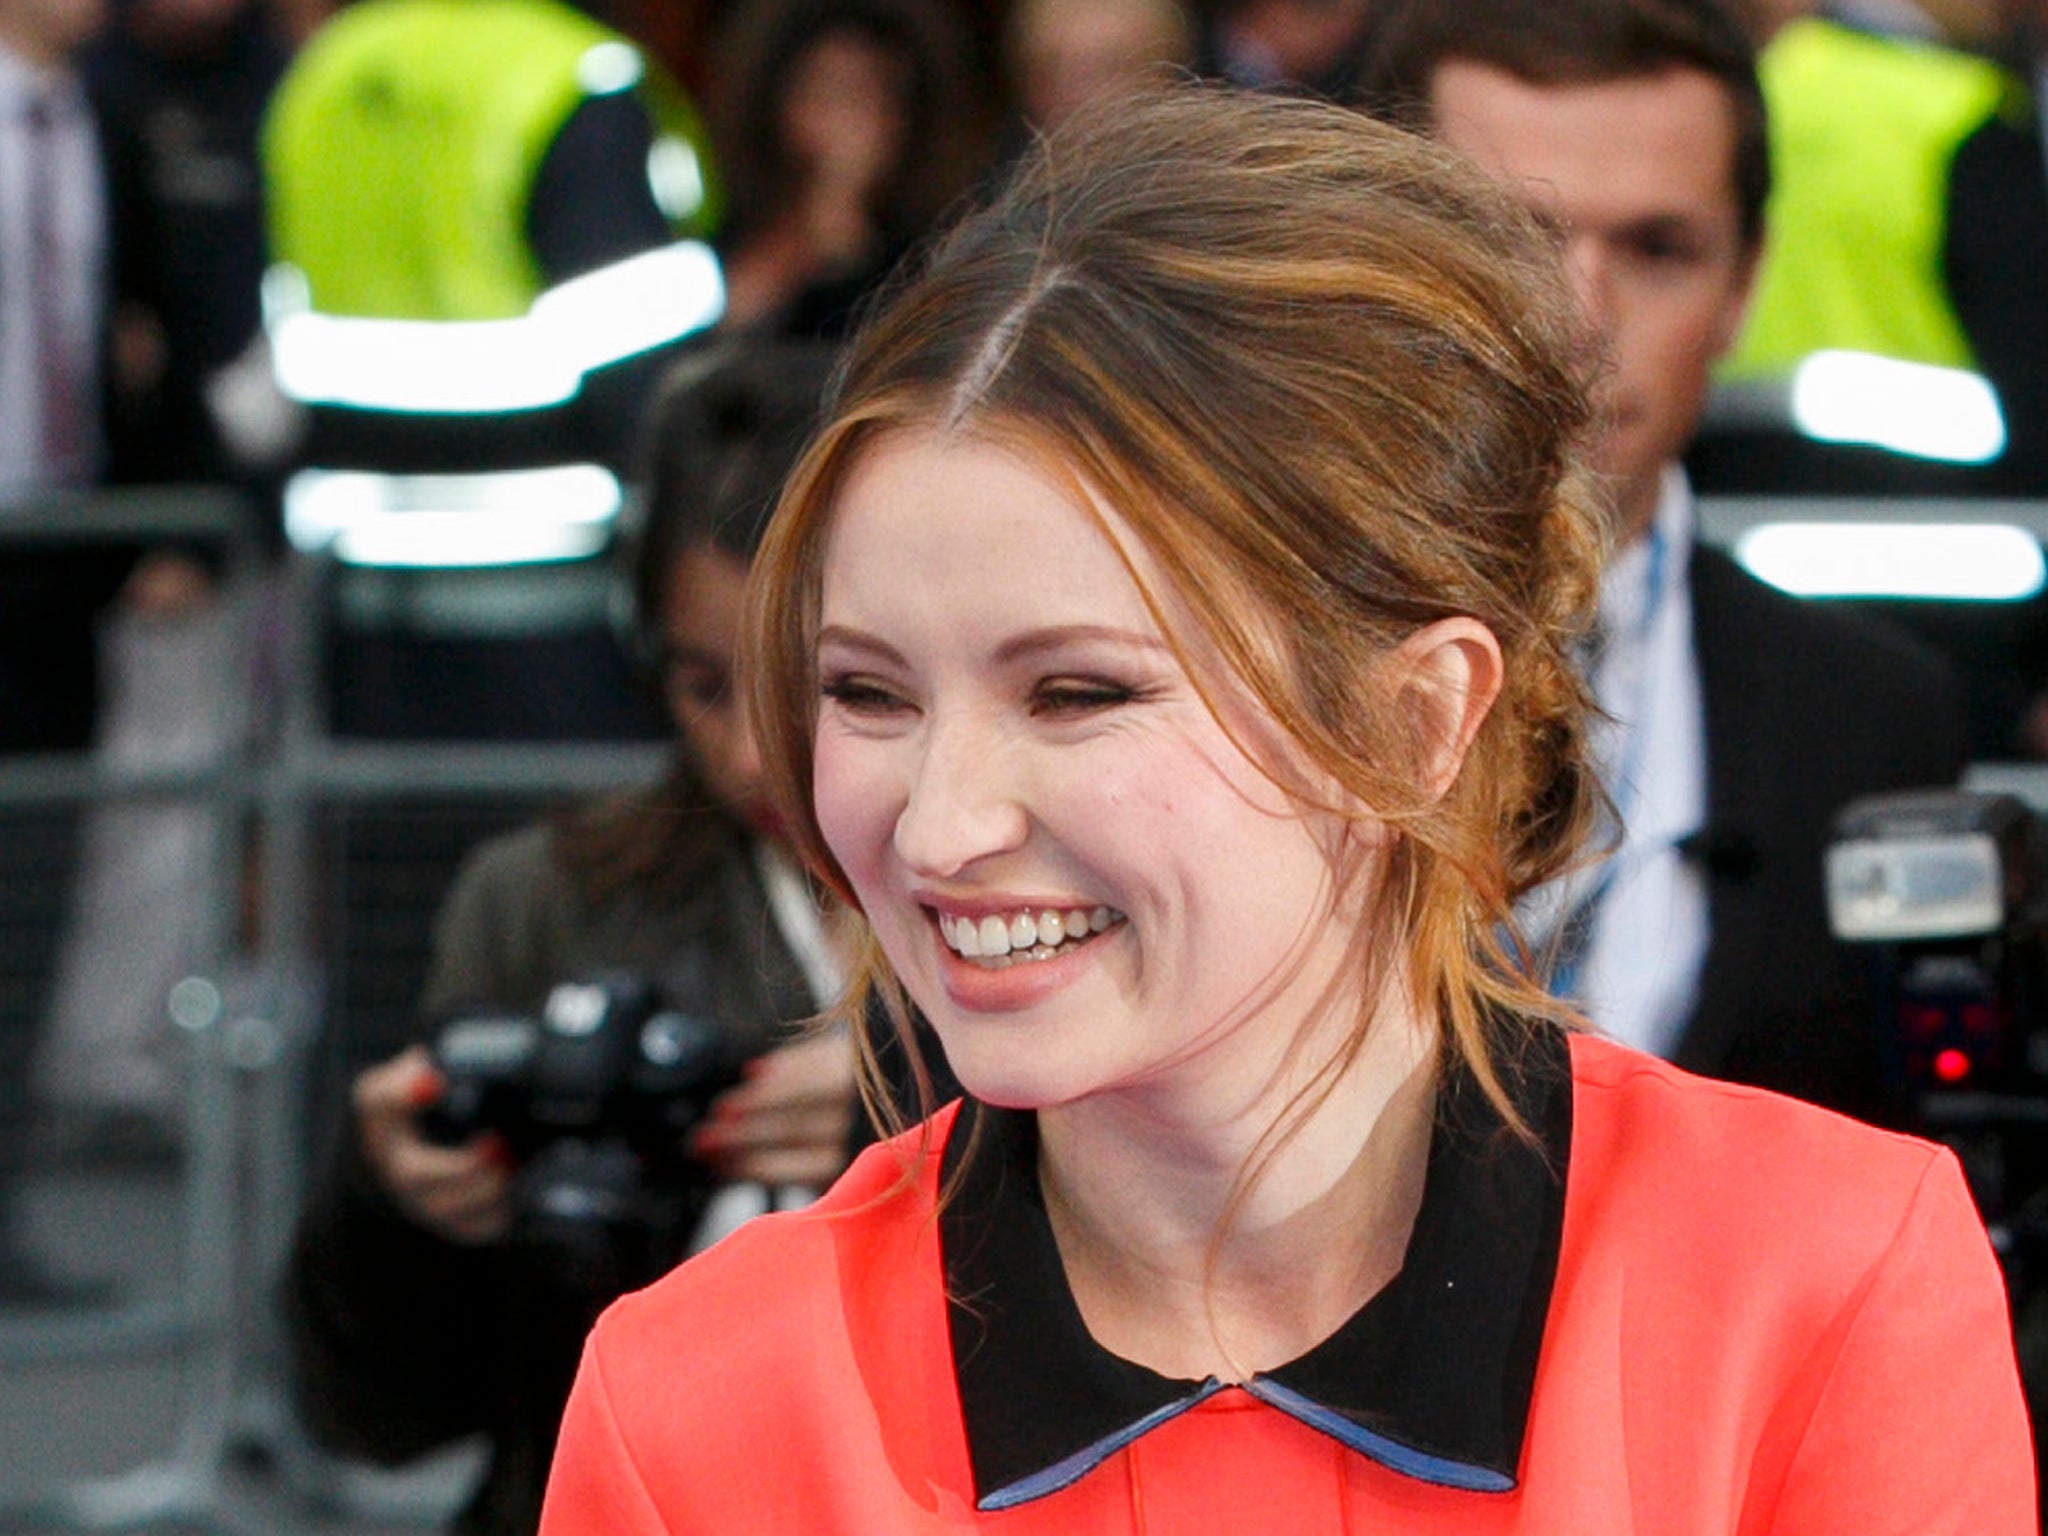 Emily Browning attends the UK Premiere of 'Legend' at Odeon Leicester Square